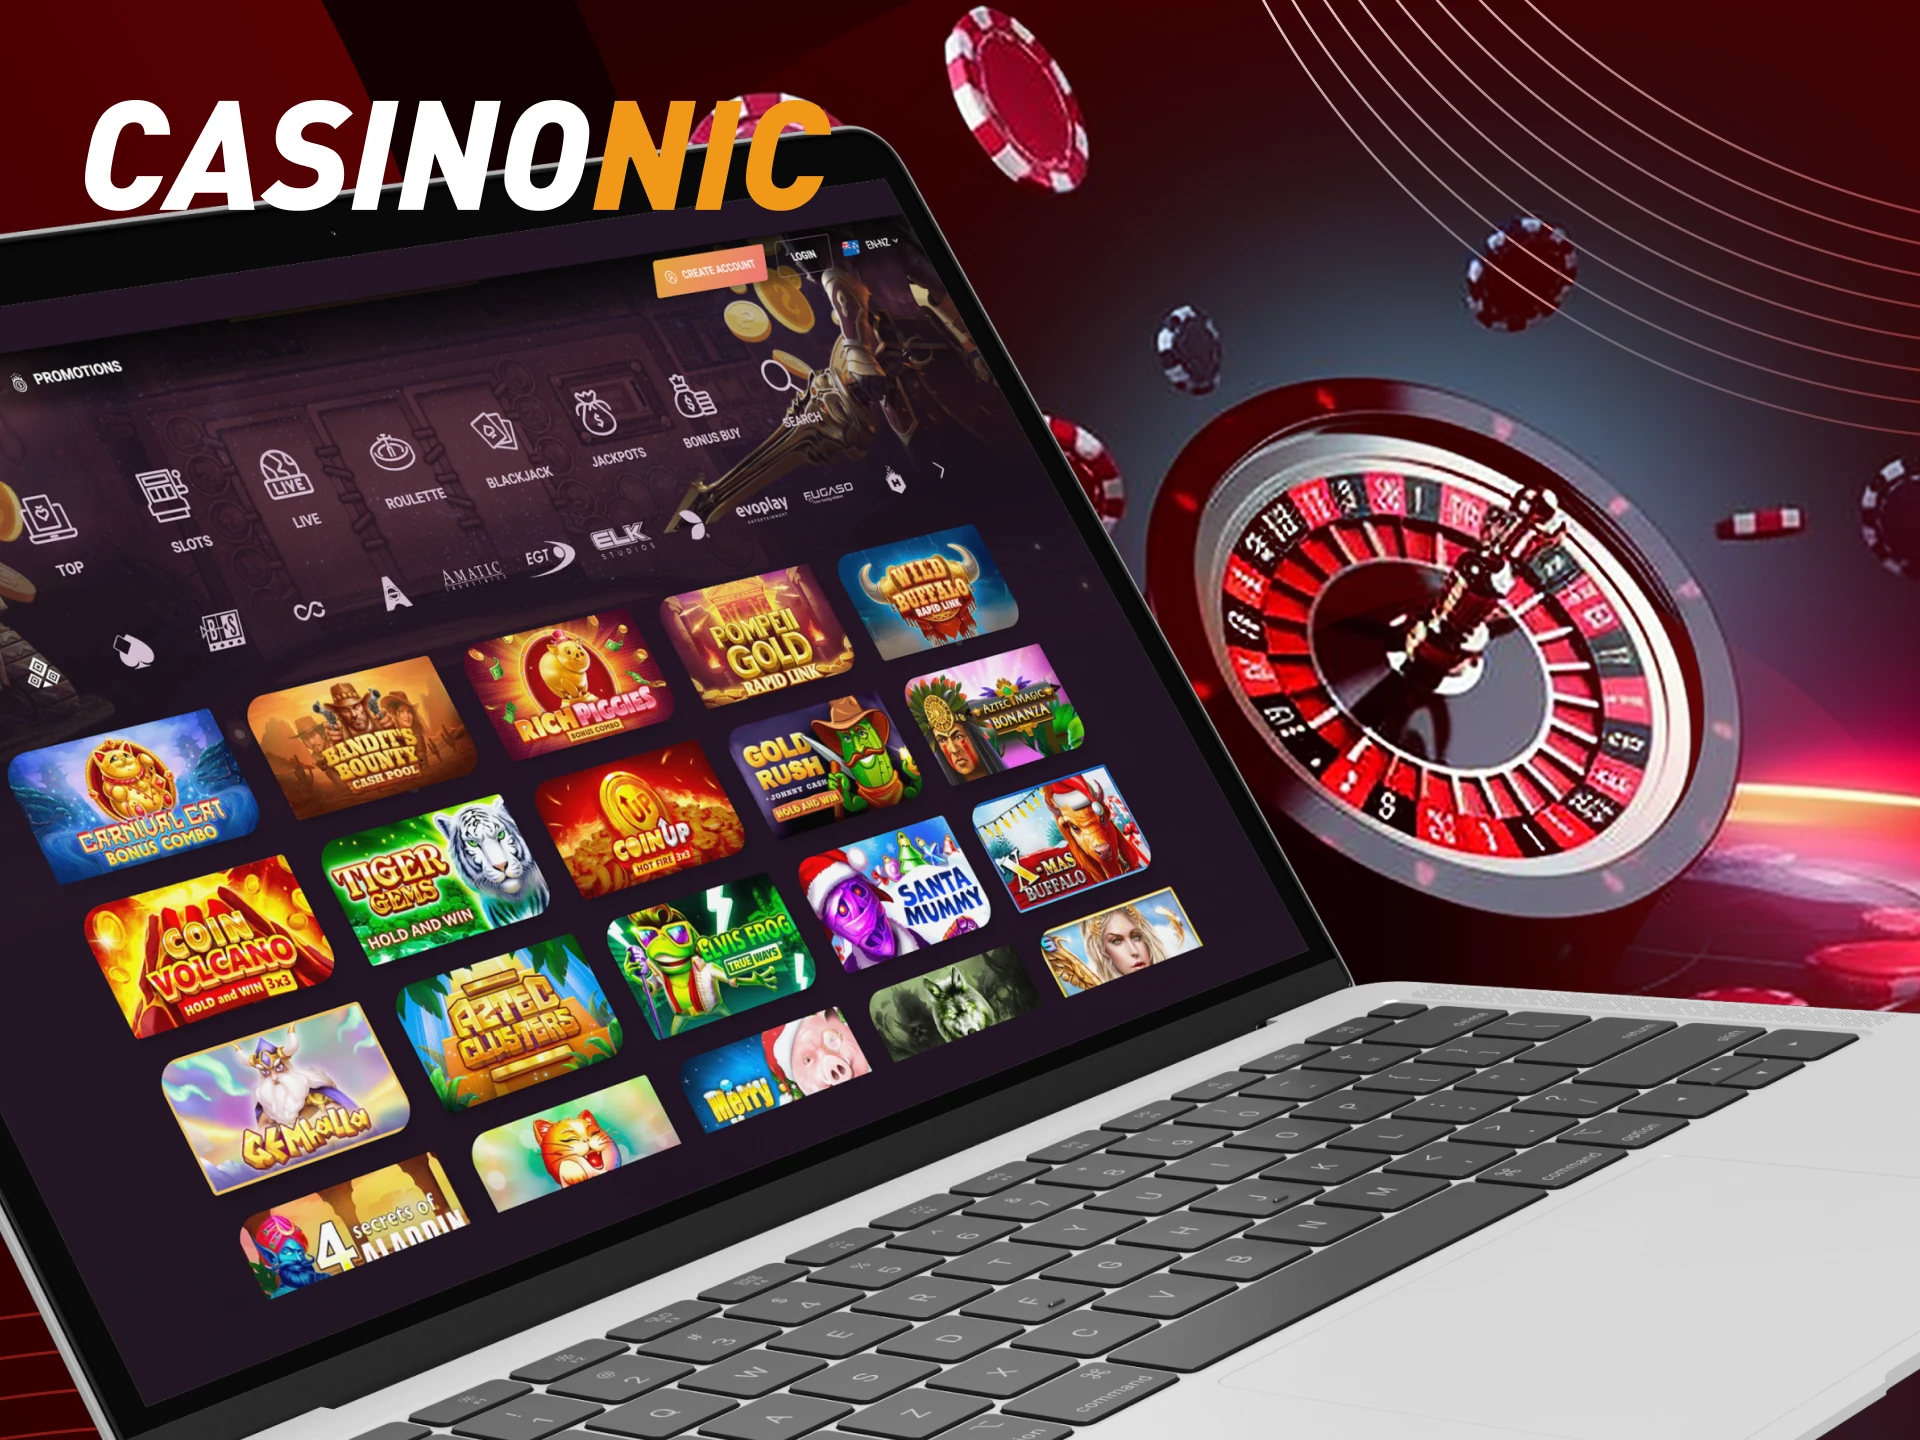 What games are there in the online casino section of the casino CasinoNic.